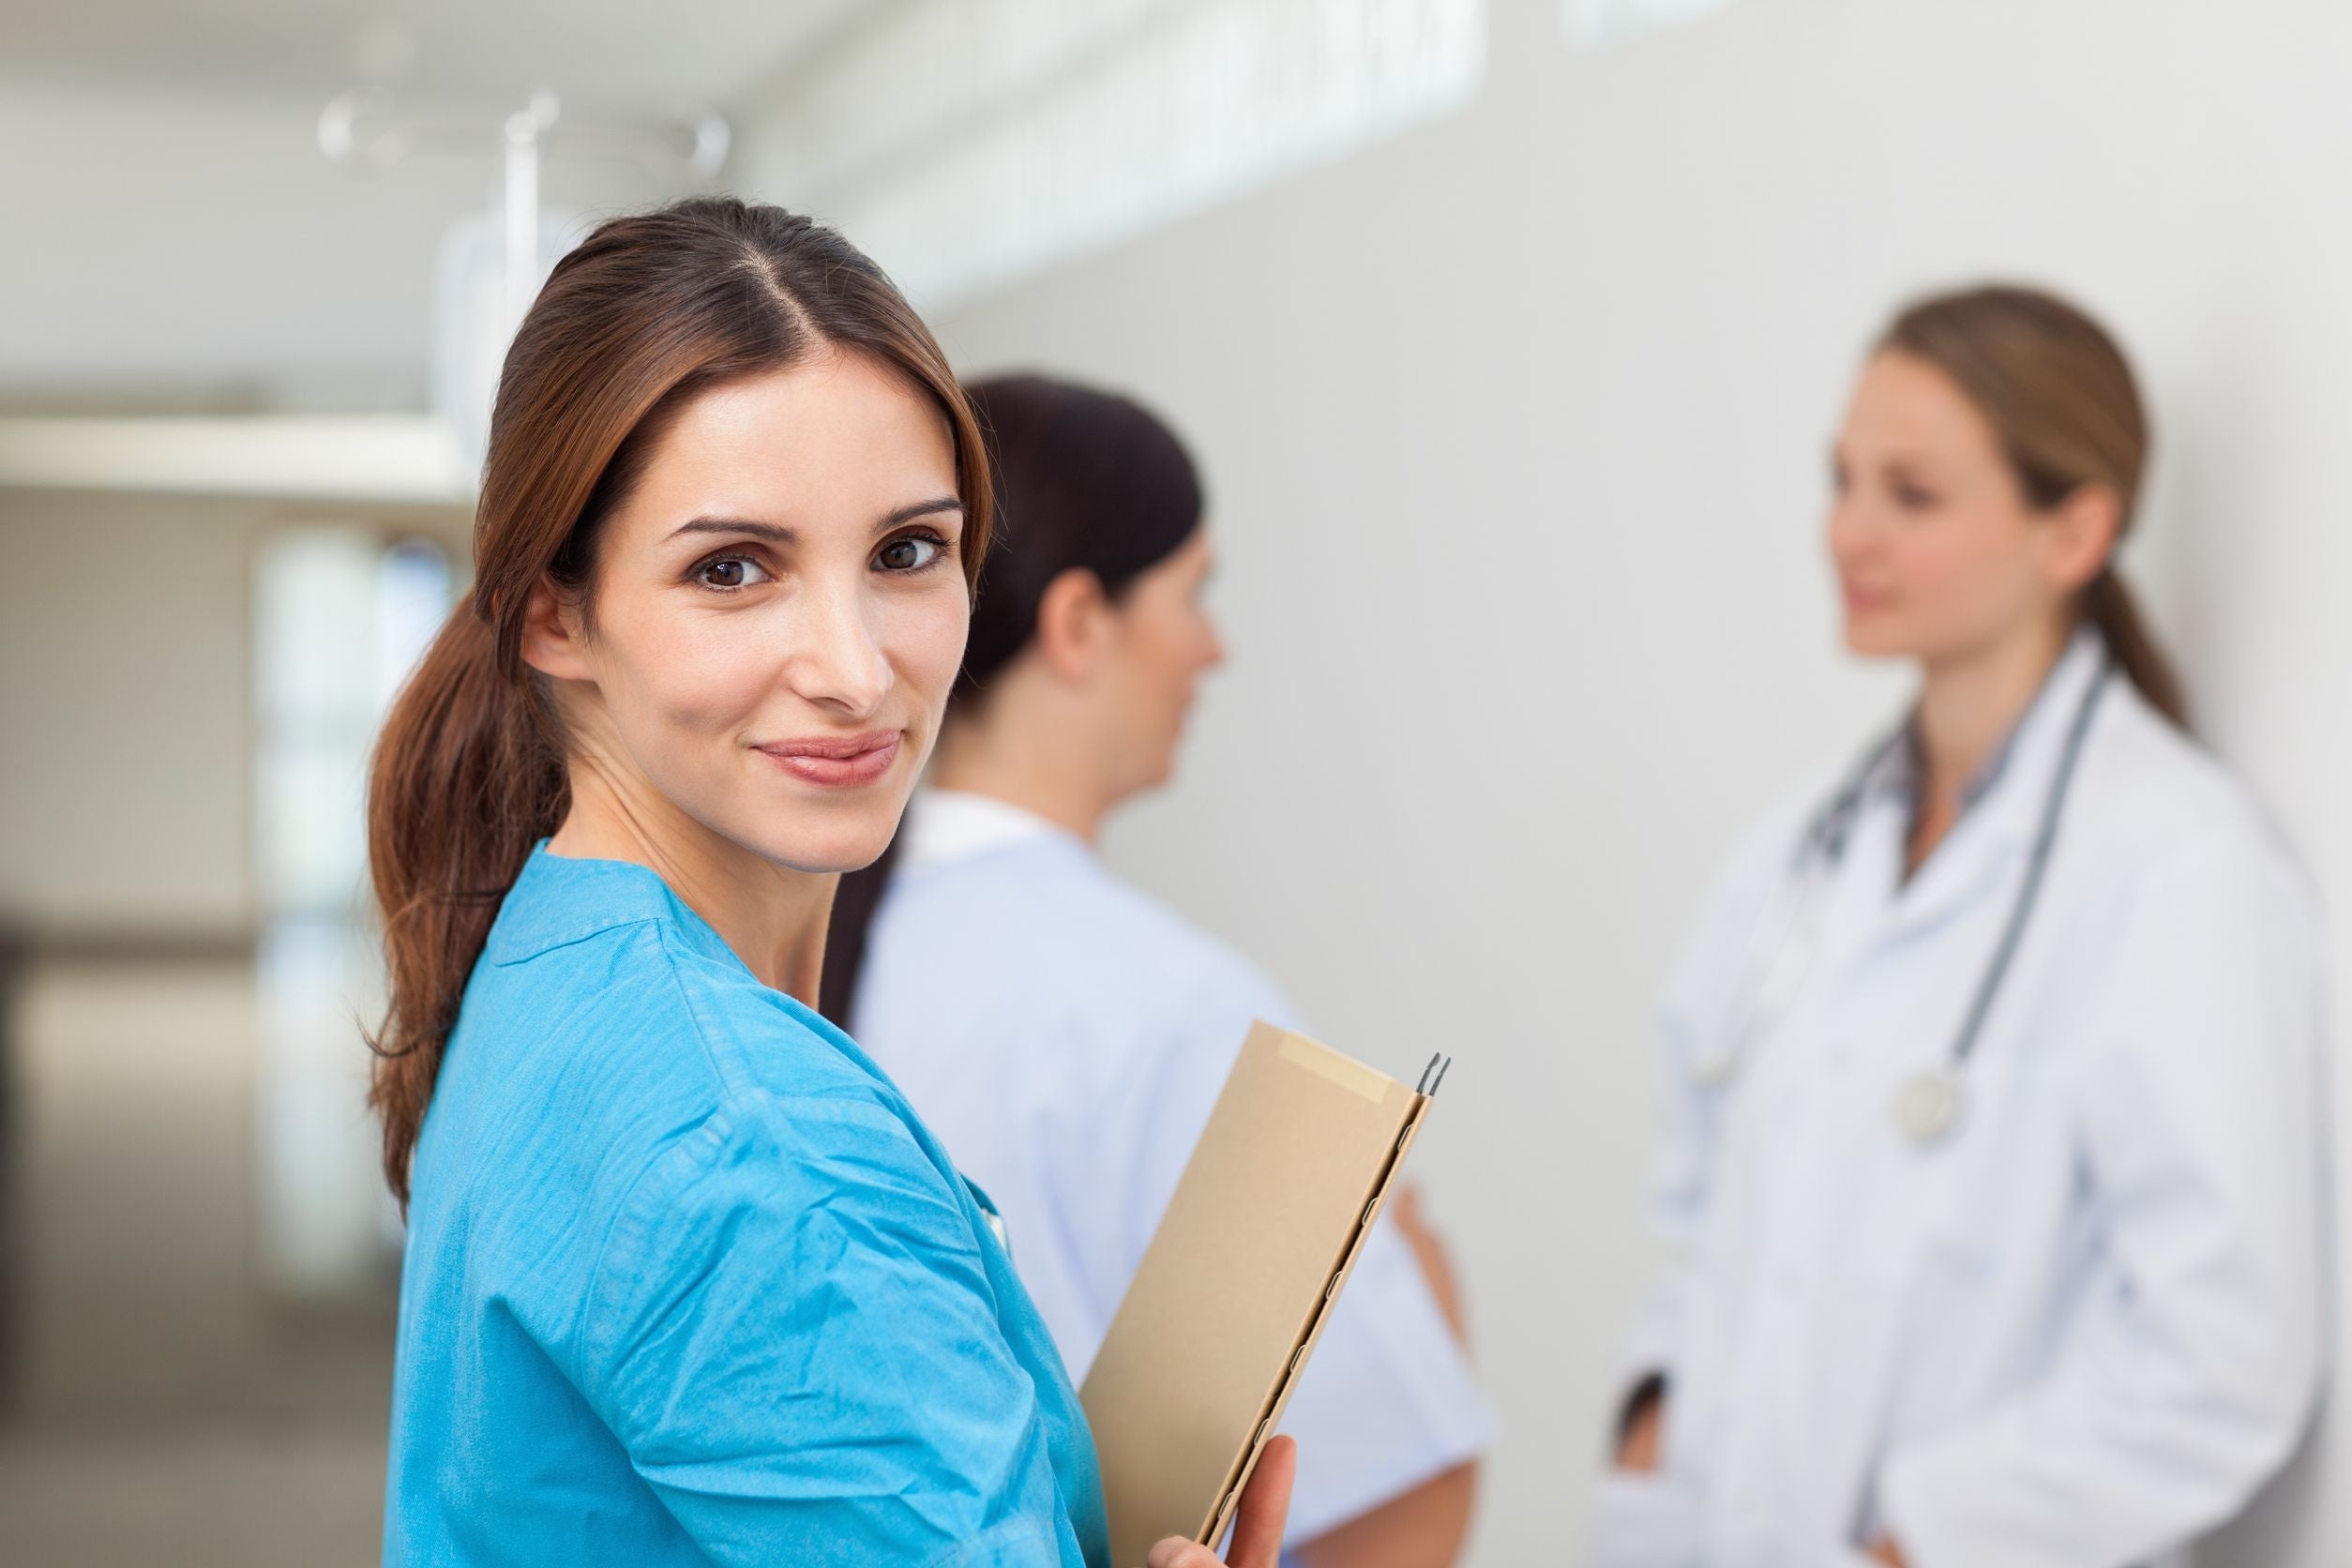 Female healthcare professional, doctors in background